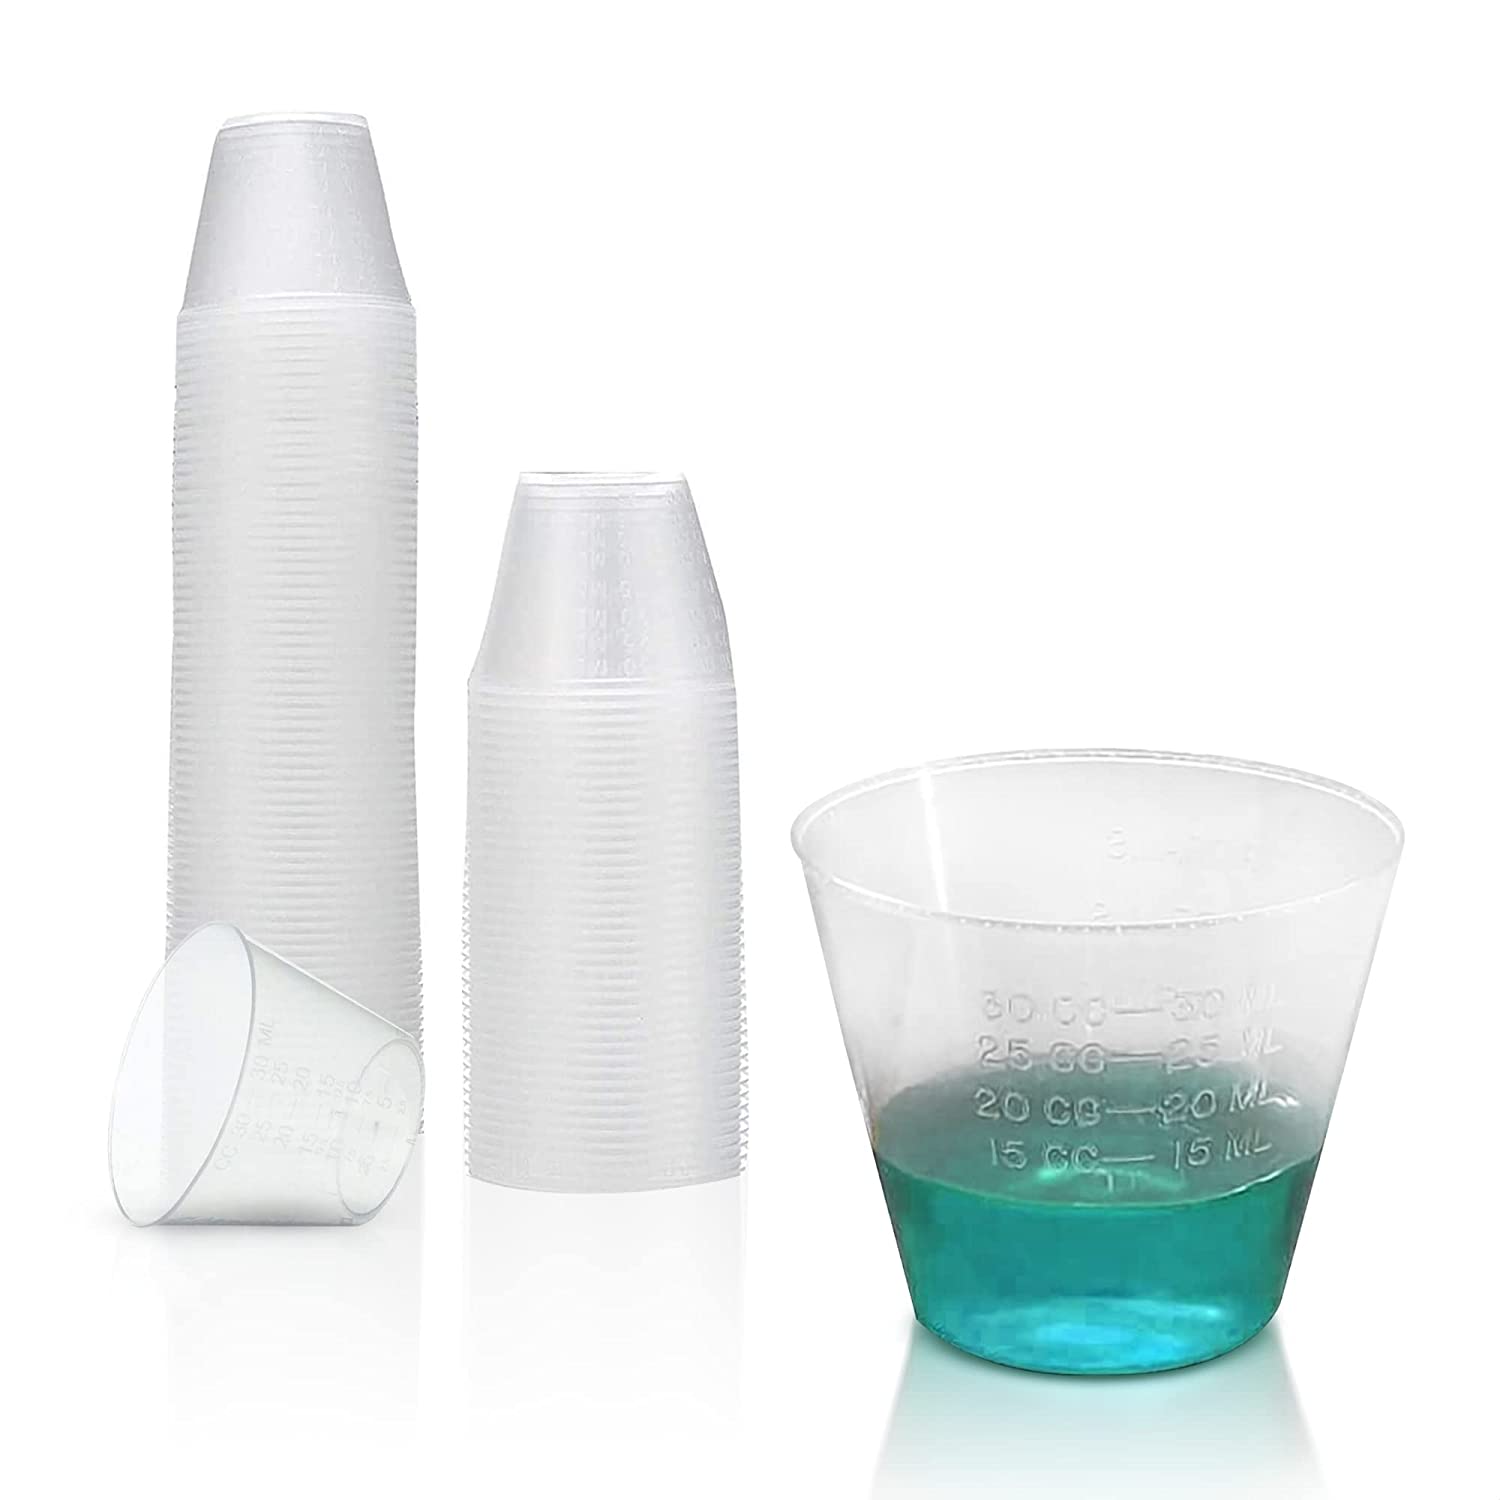 Dukal Medicine Cups 1 oz. Pack of 100 Translucent Polypropylene Cups 30 ml. Calibrated with Two measurements. Unbreakable Construction, Easy to Read, 9007-M